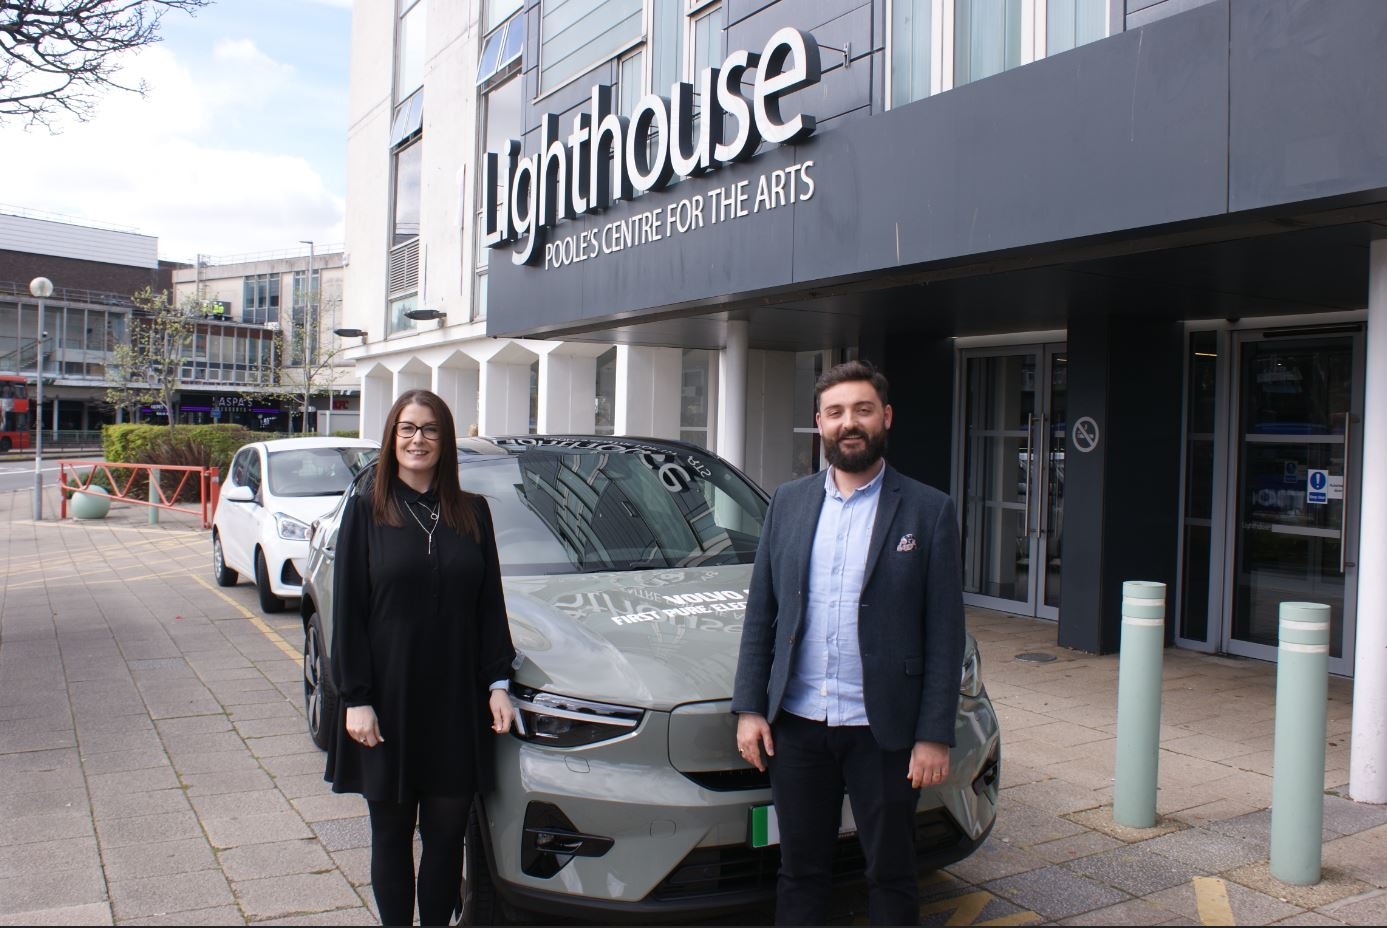 Volvo Cars Poole partners with Lighthouse, Poole’s centre for the arts